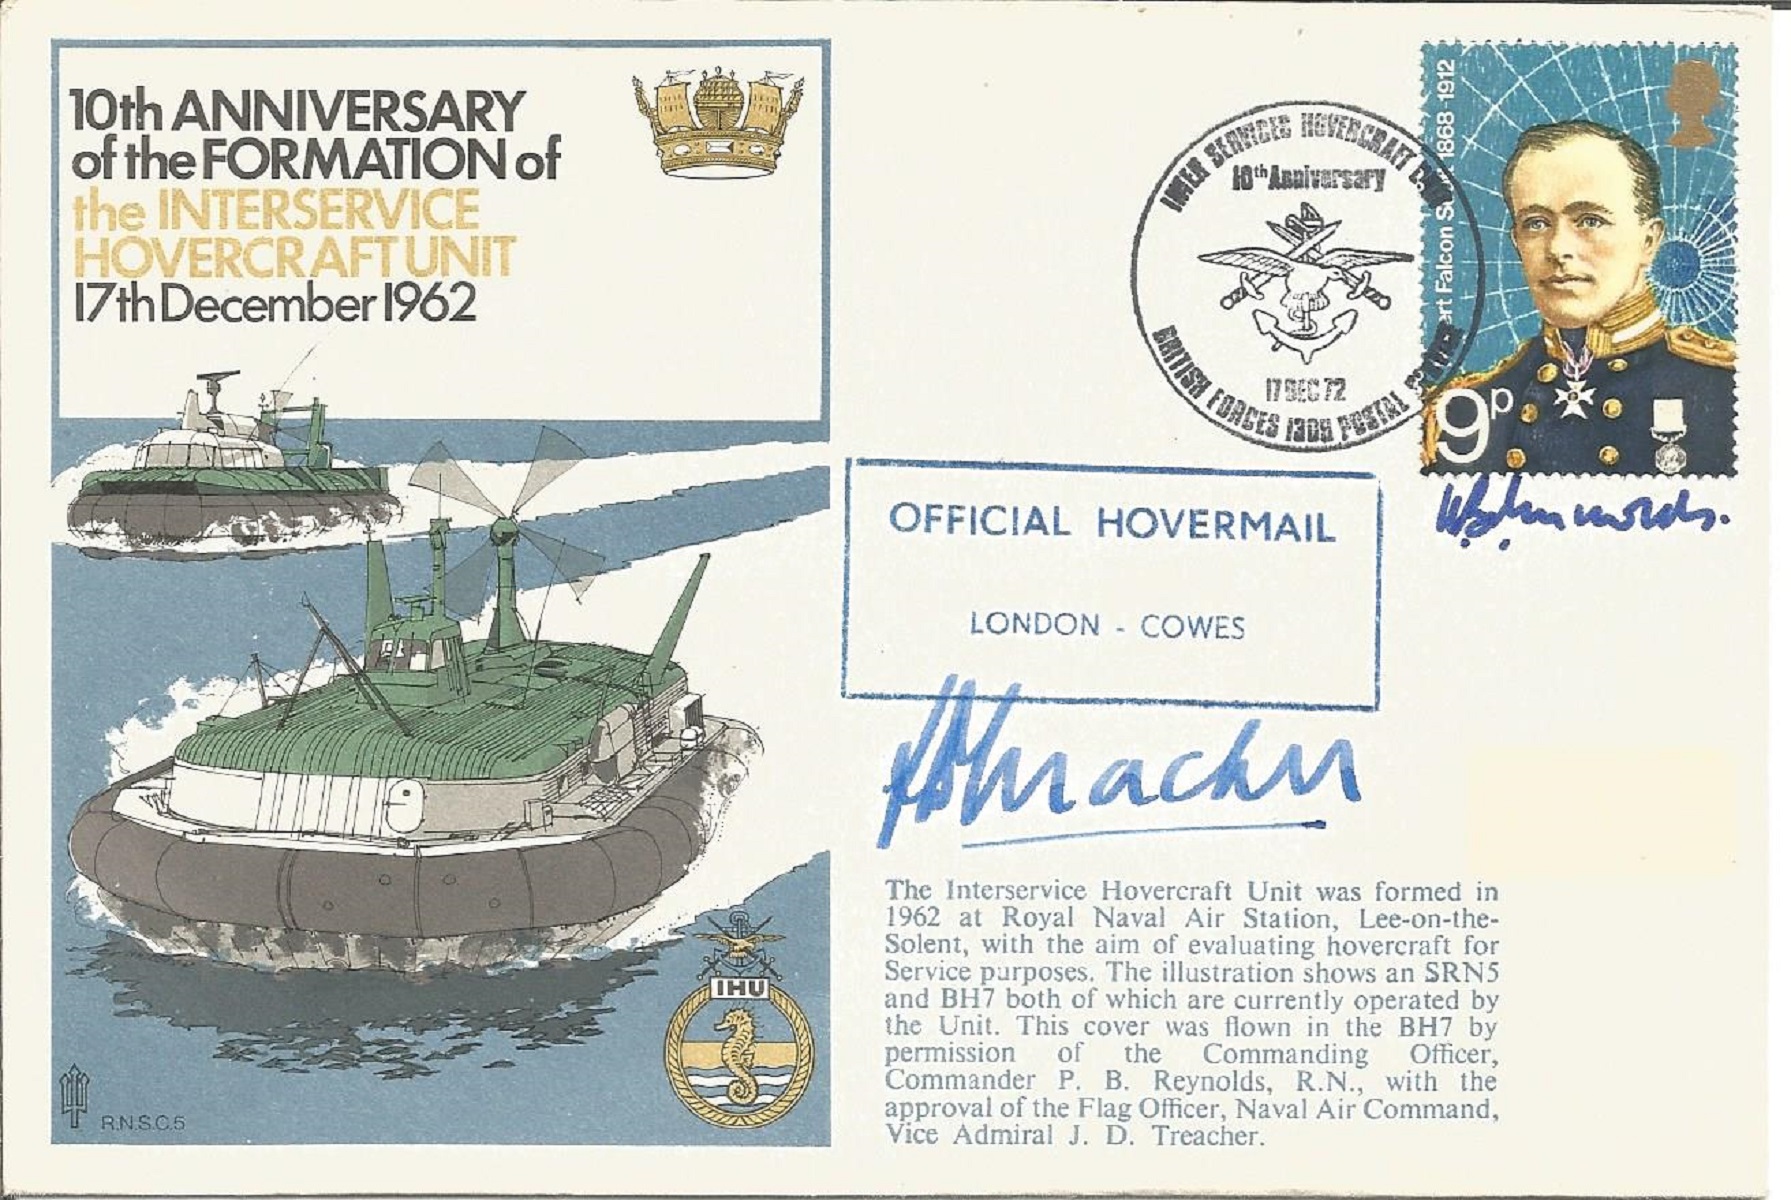 Commander P B Reynolds and Vice Admiral J D Treacher signed RNSC5 cover commemorating the 10th